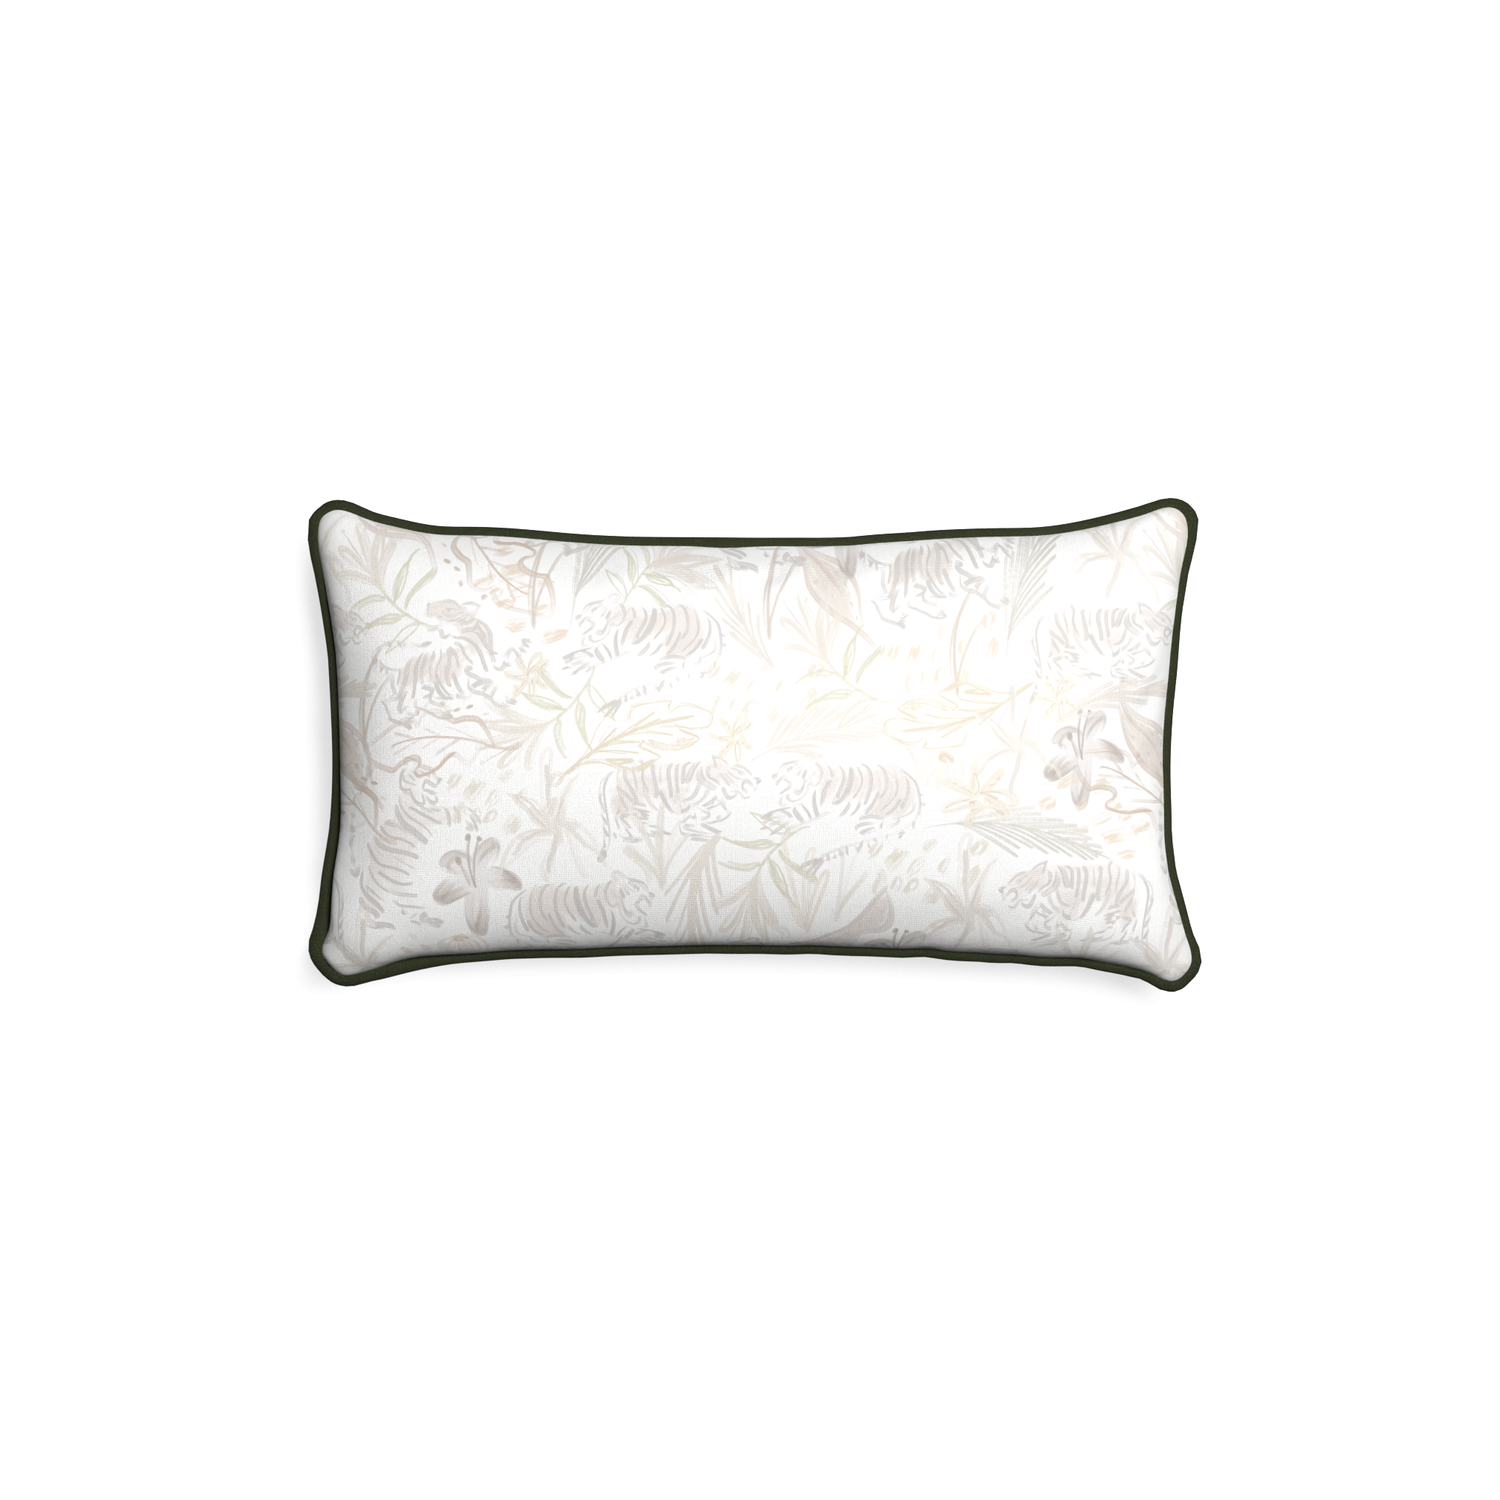 Petite-lumbar frida sand custom beige chinoiserie tigerpillow with f piping on white background